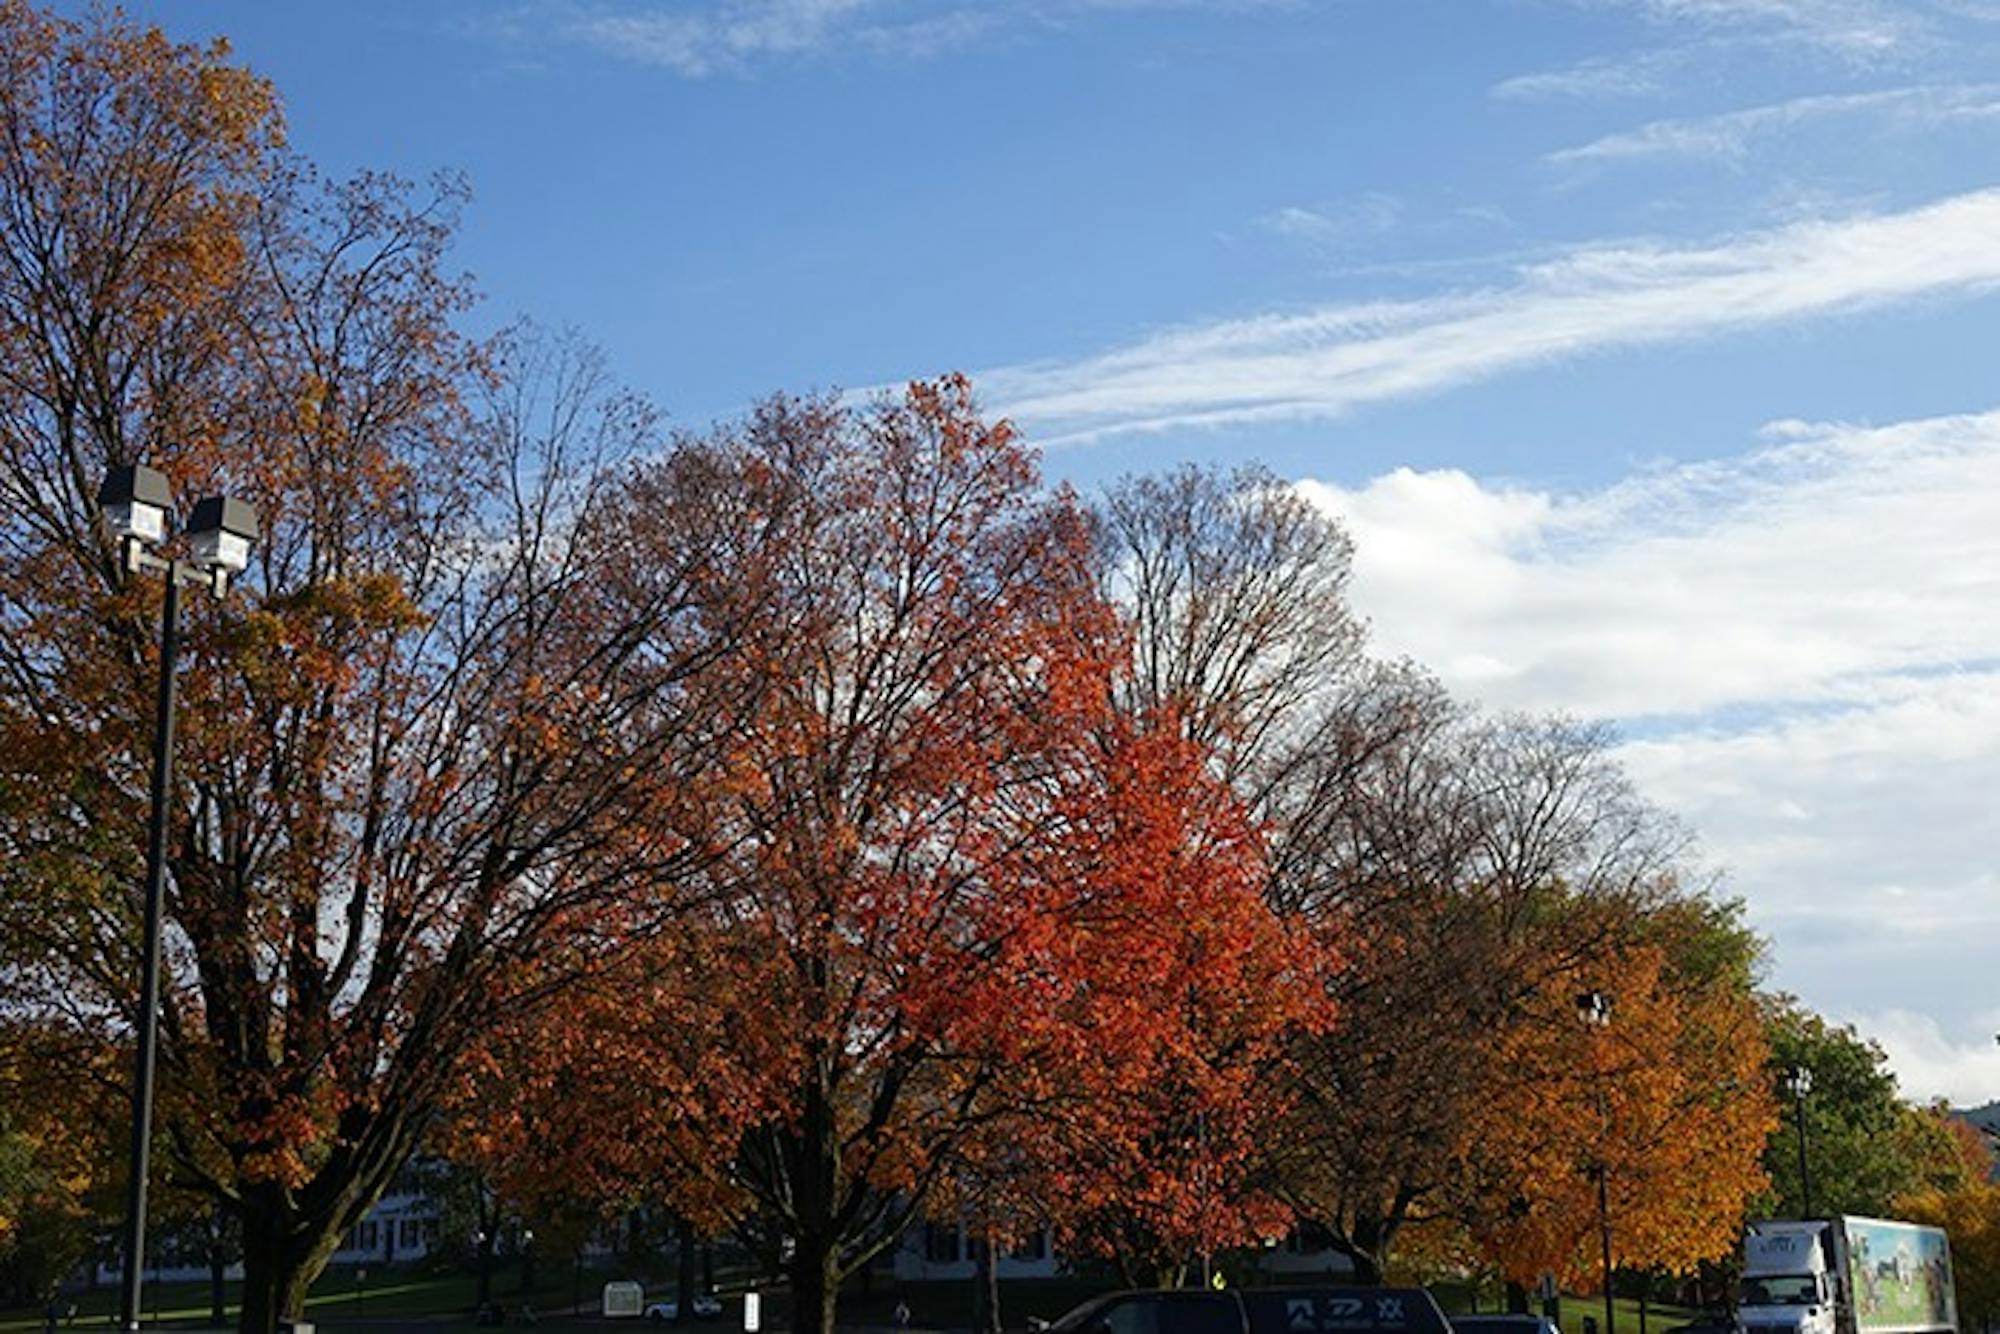 Hanover and surrounding areas are currently experiencing peak foliage.